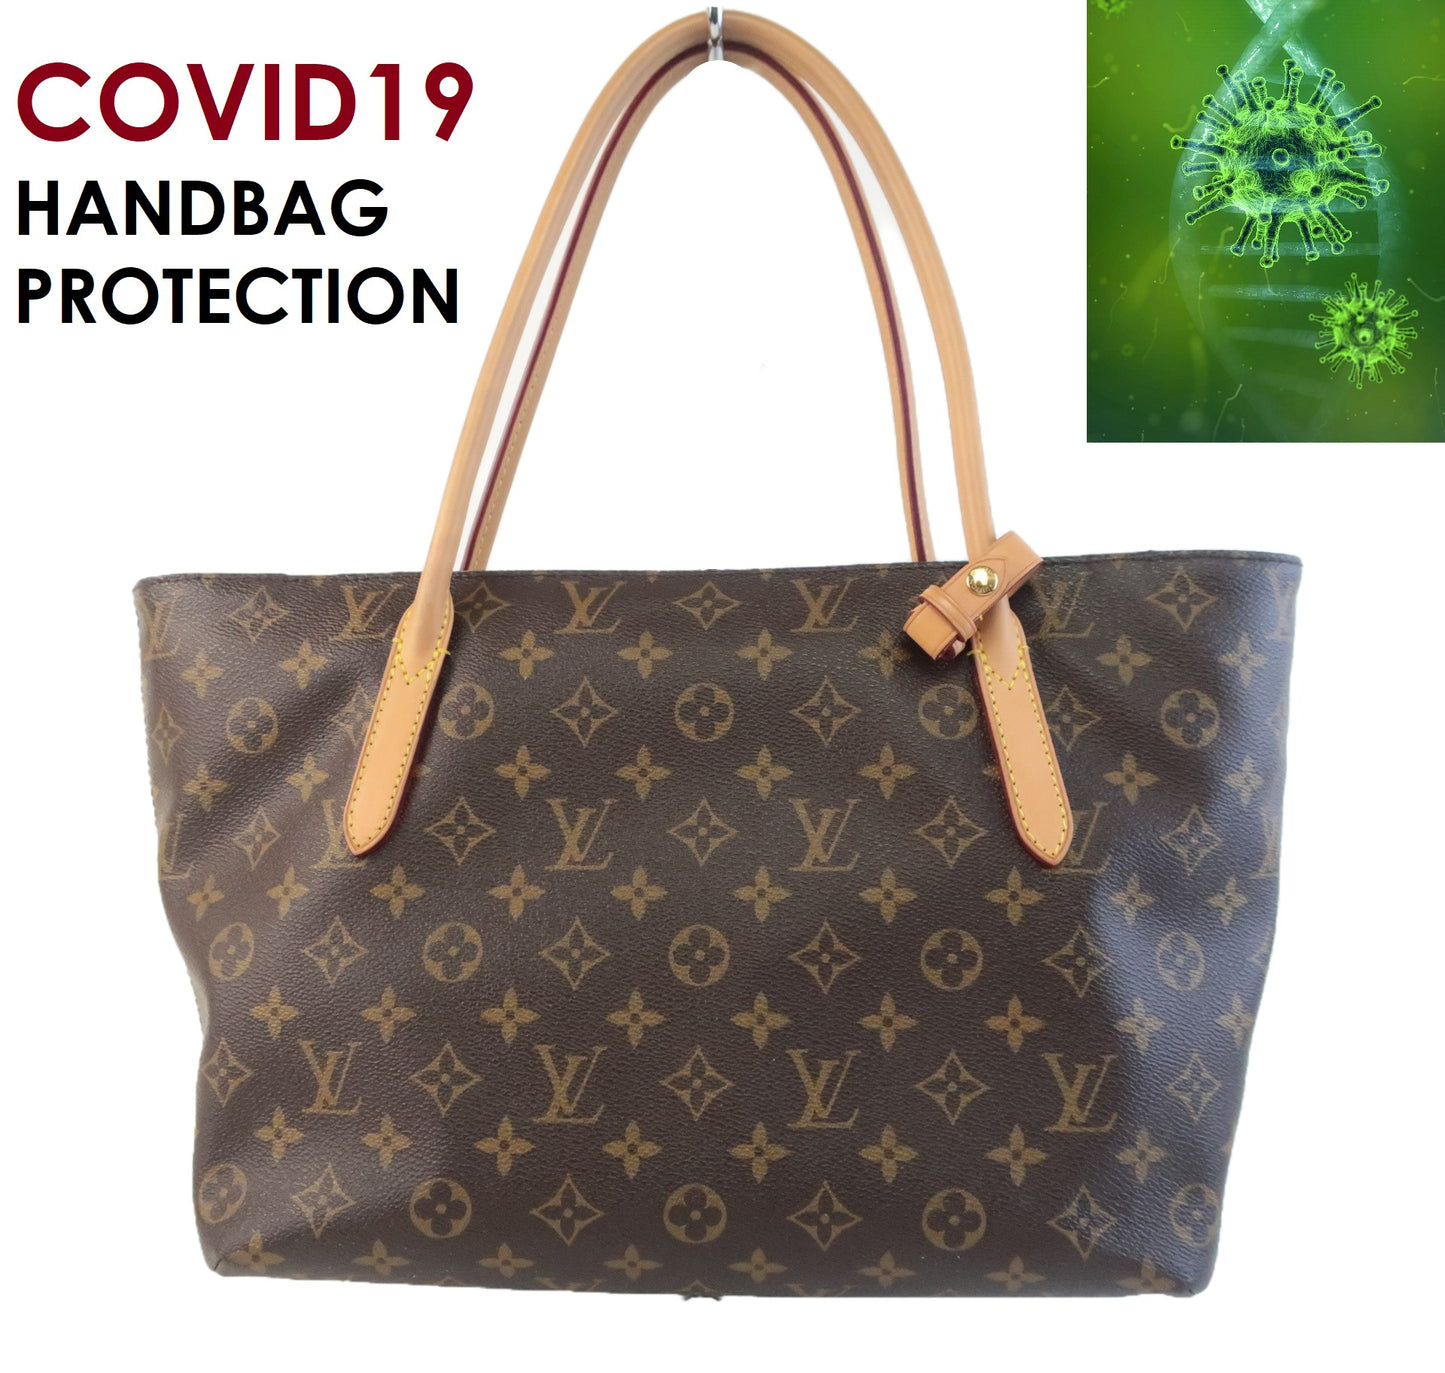 Can You Catch the Coronavirus from Buying a Pre-Loved Bag?